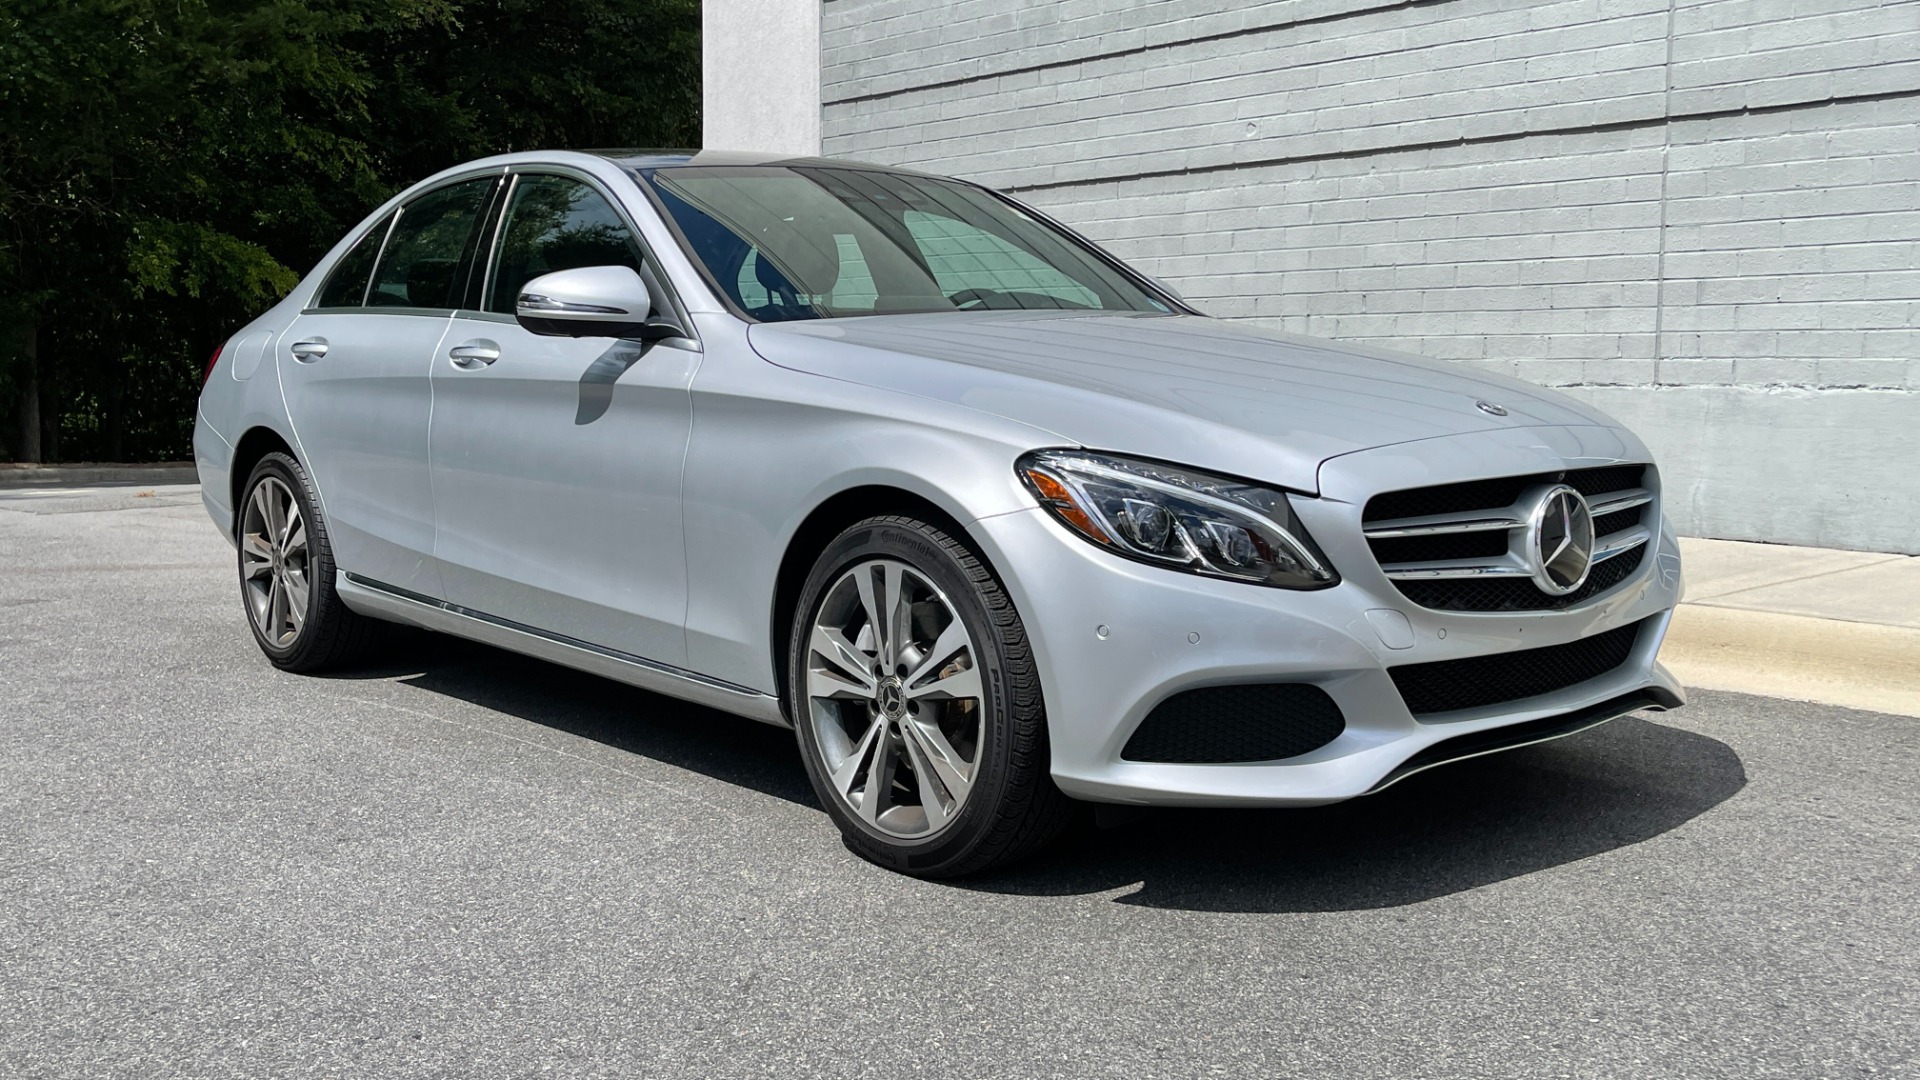 Used 2018 Mercedes-Benz C-Class C300 / PANORAMIC / HEADS UP DISPLAY / ADVANCED LIGHTING / PREMIUM ASSISTANC for sale $32,995 at Formula Imports in Charlotte NC 28227 6